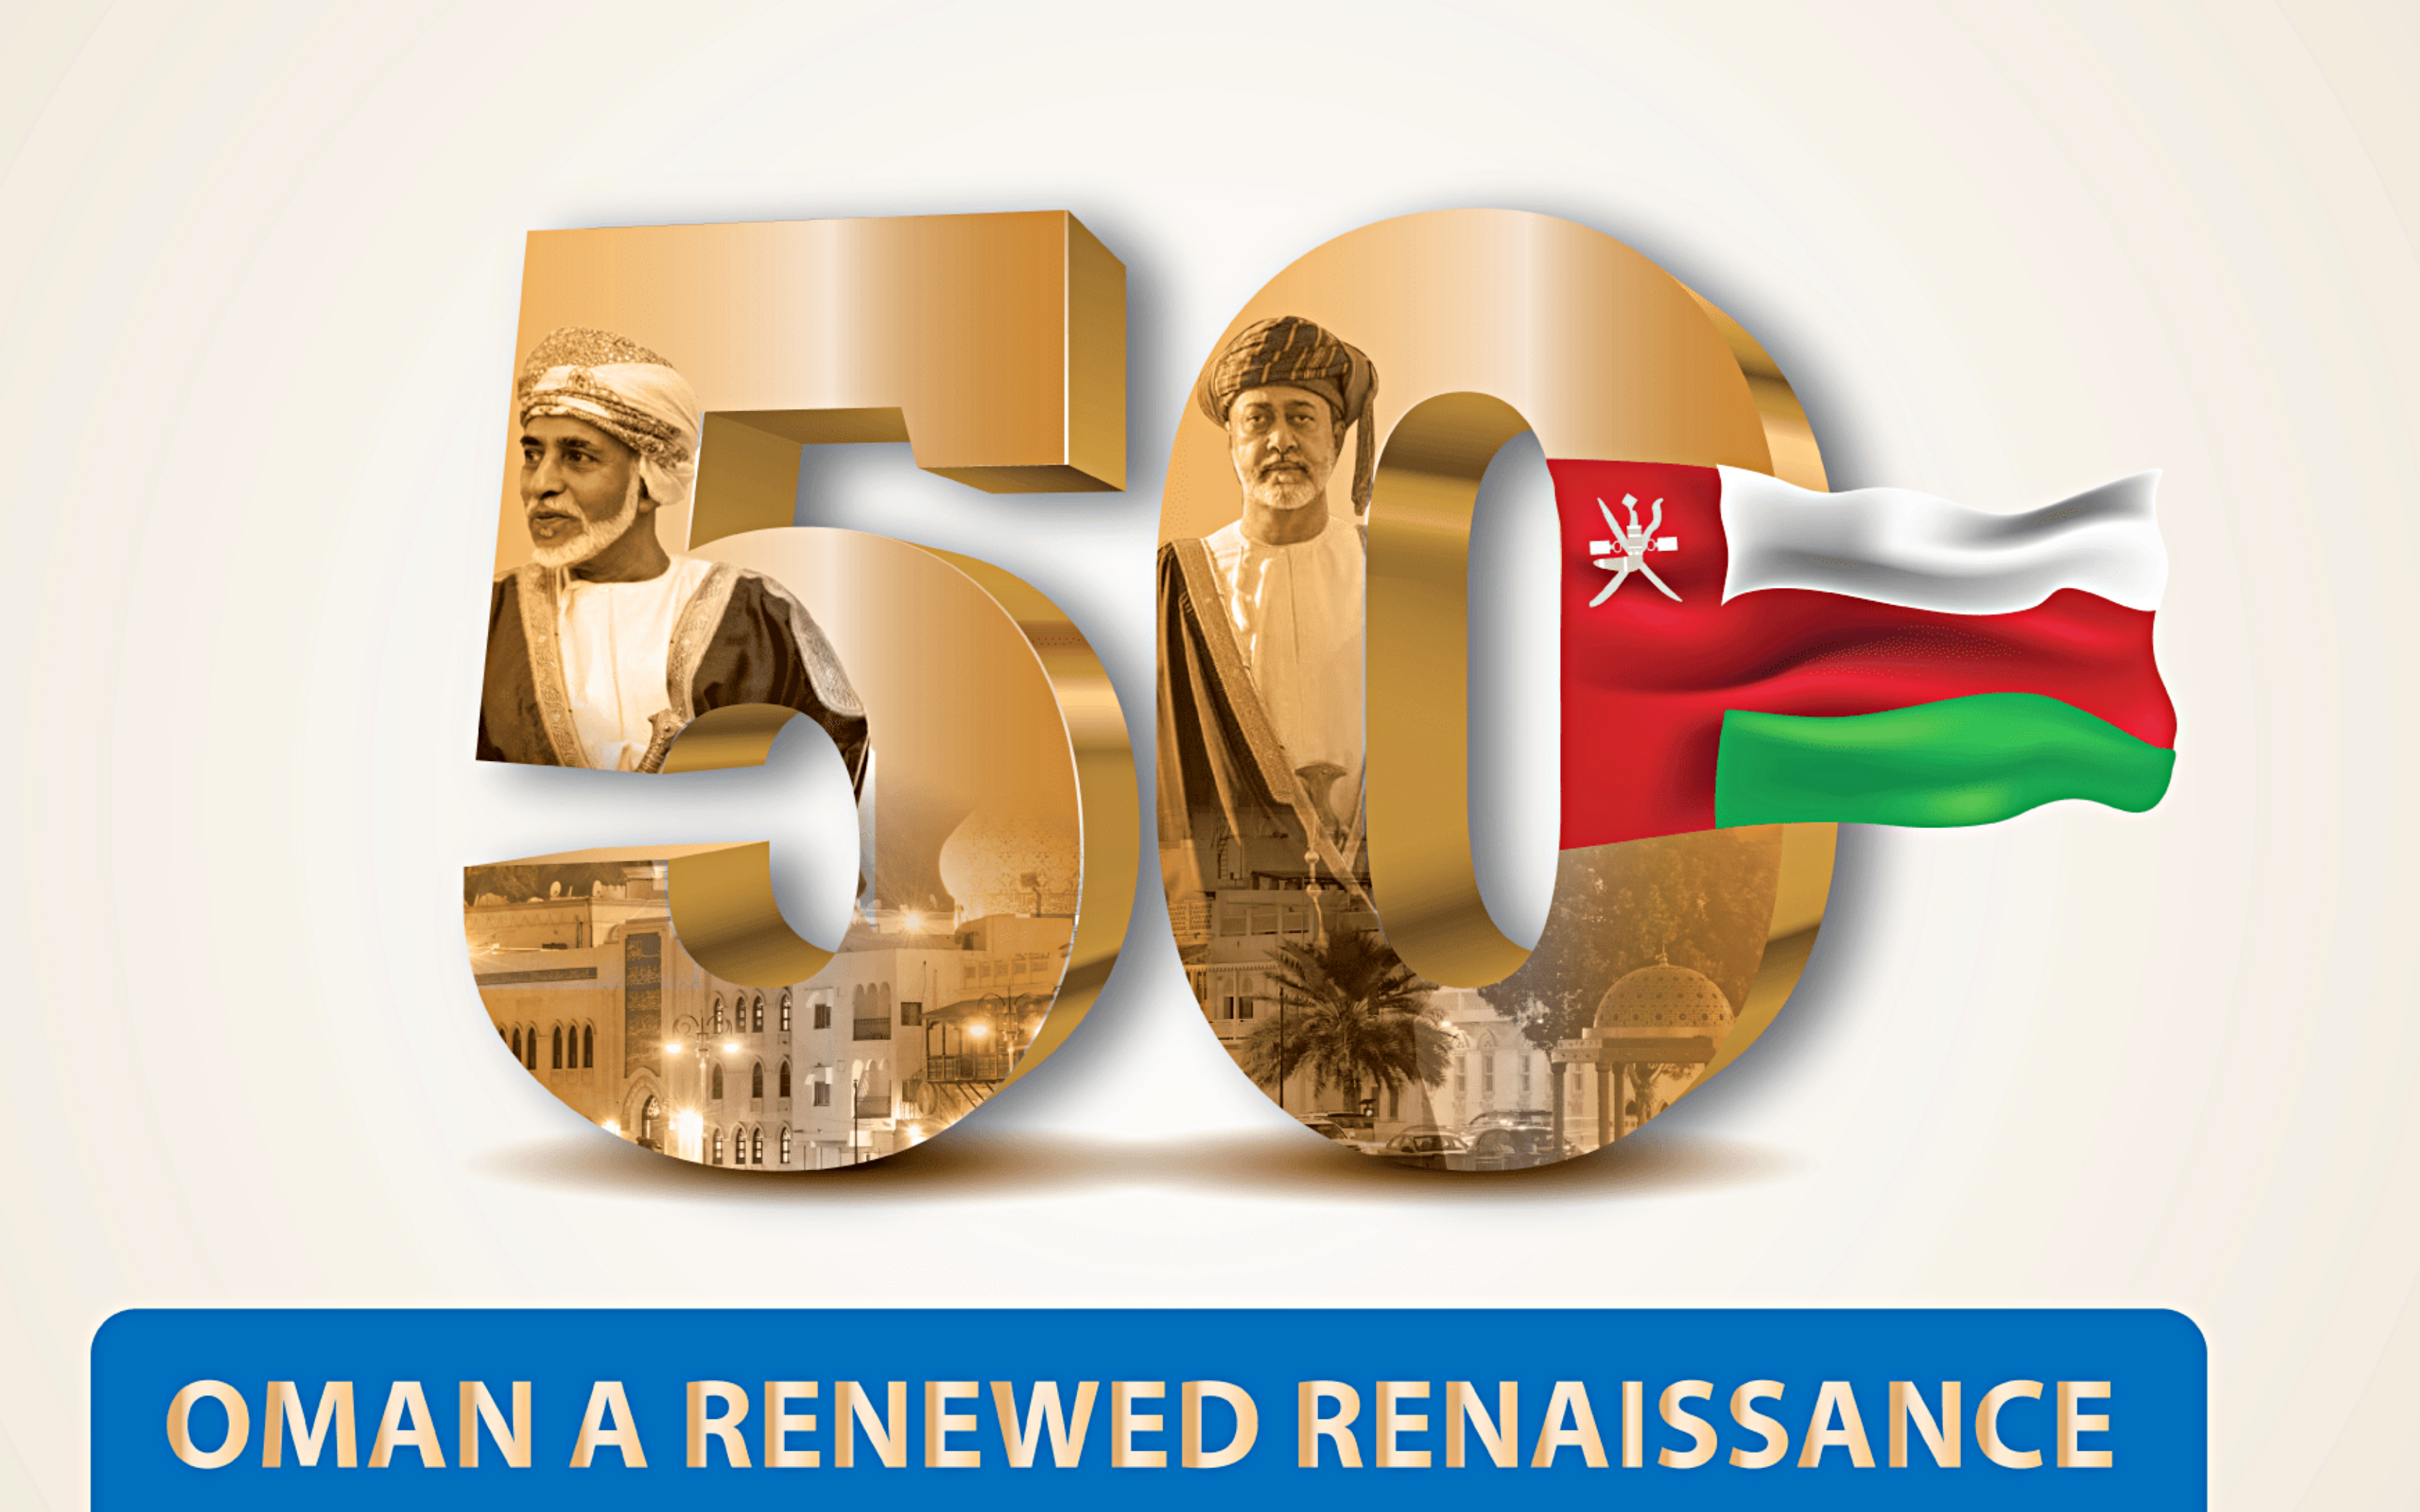 Oman's 50th National Day